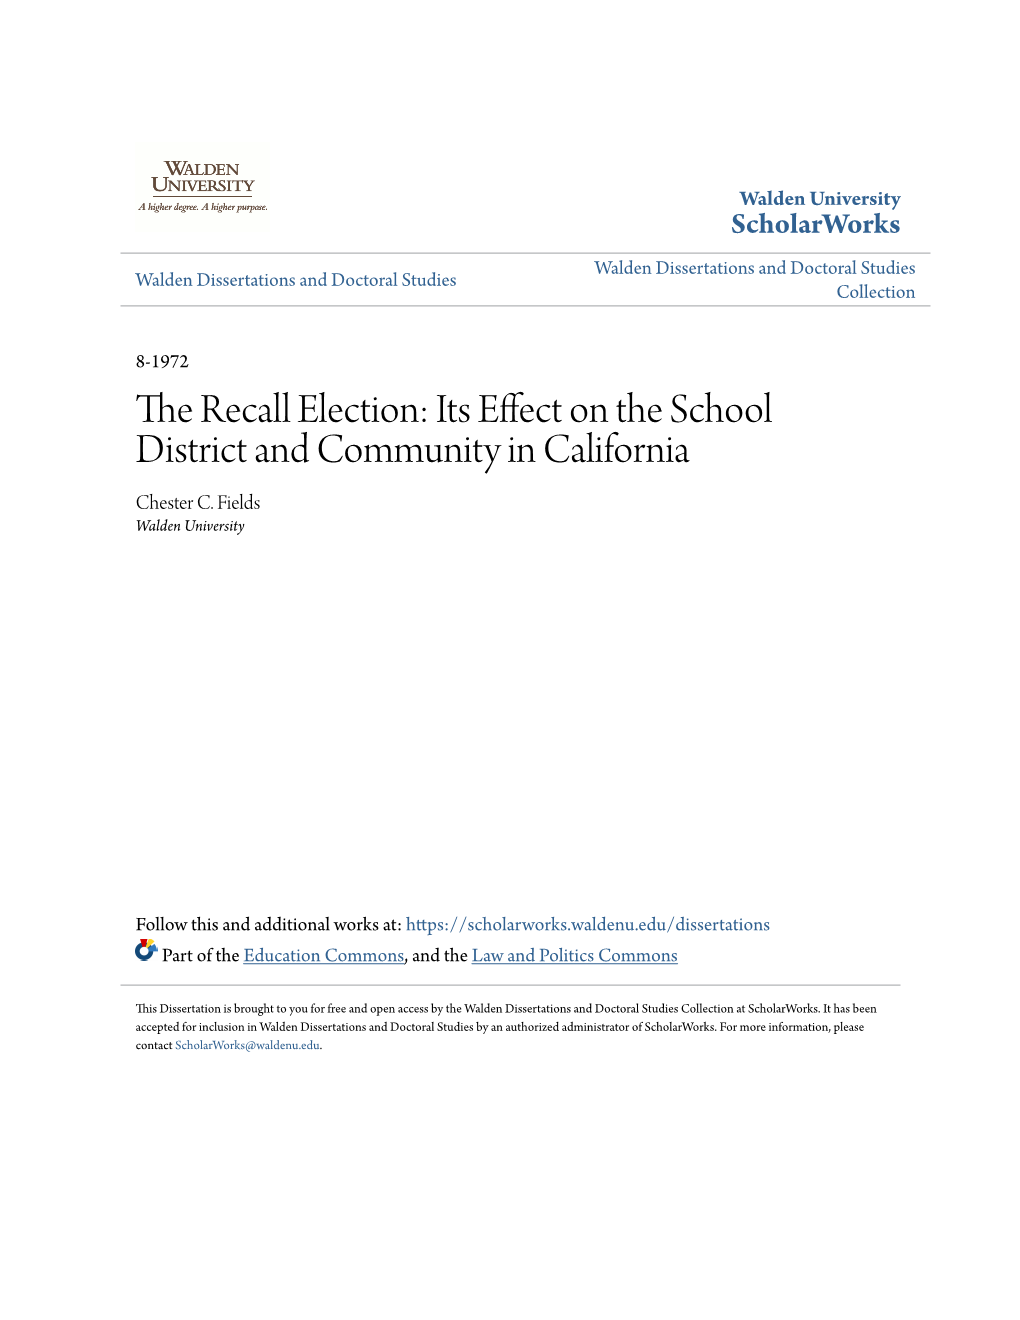 The Recall Election: Its Effect on the School District and Community in California Chester C